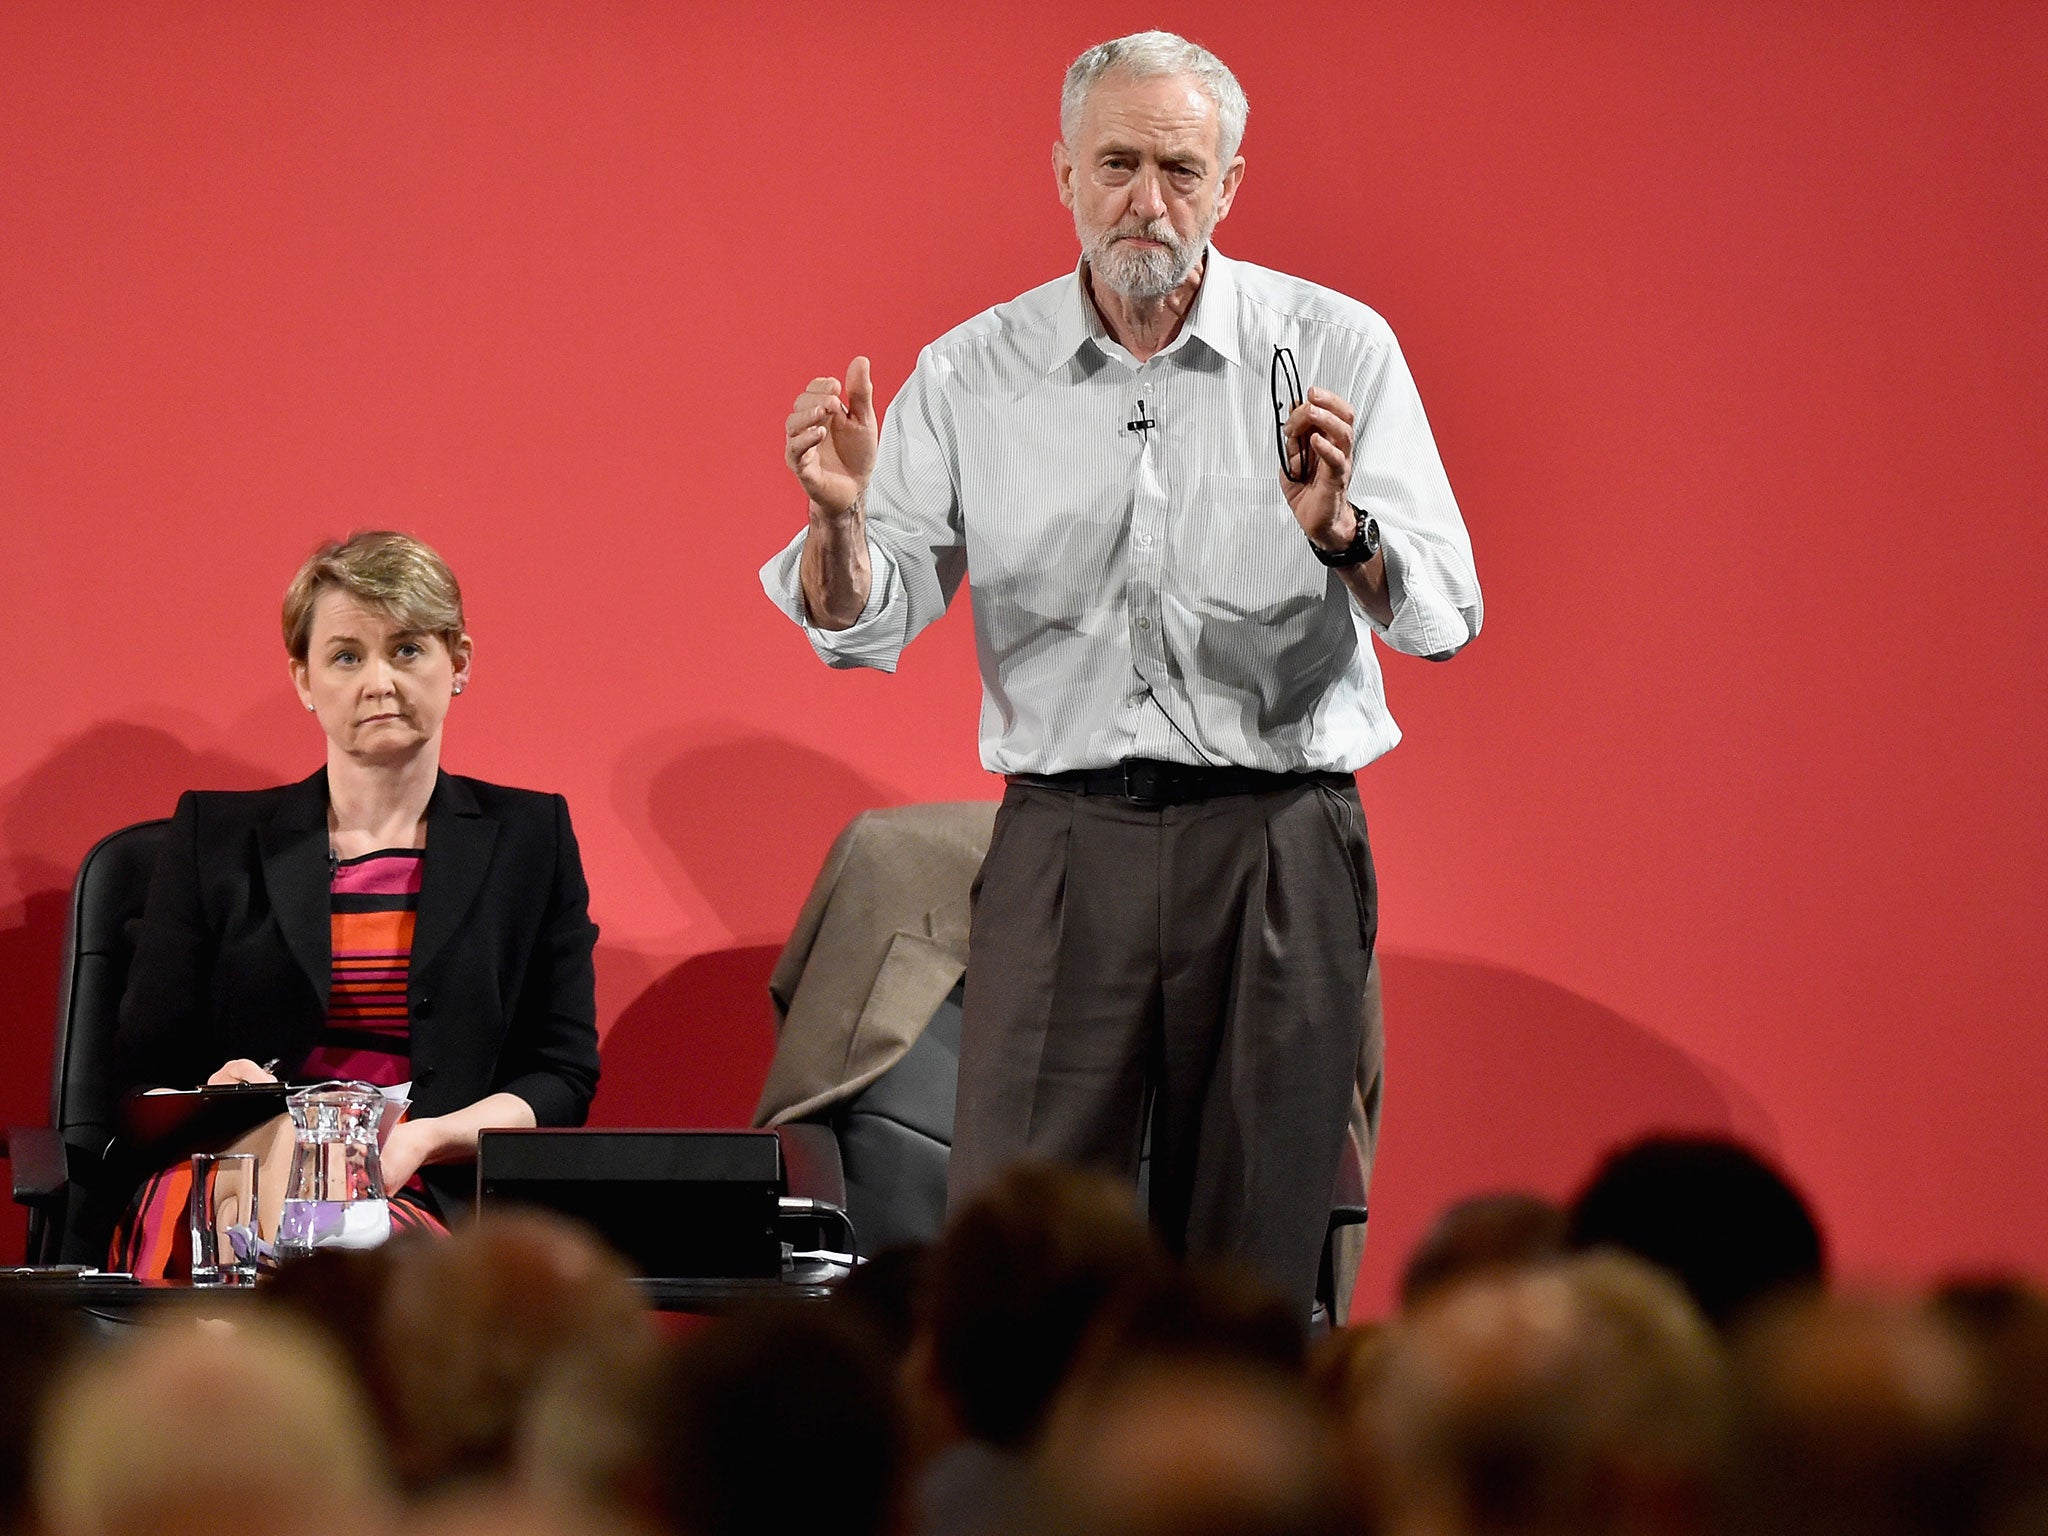 Jeremy Corbyn,takes part in a hustings in The Old Fruitmarket, Candleriggs on July 10, 2015 in Glasgow, Scotland